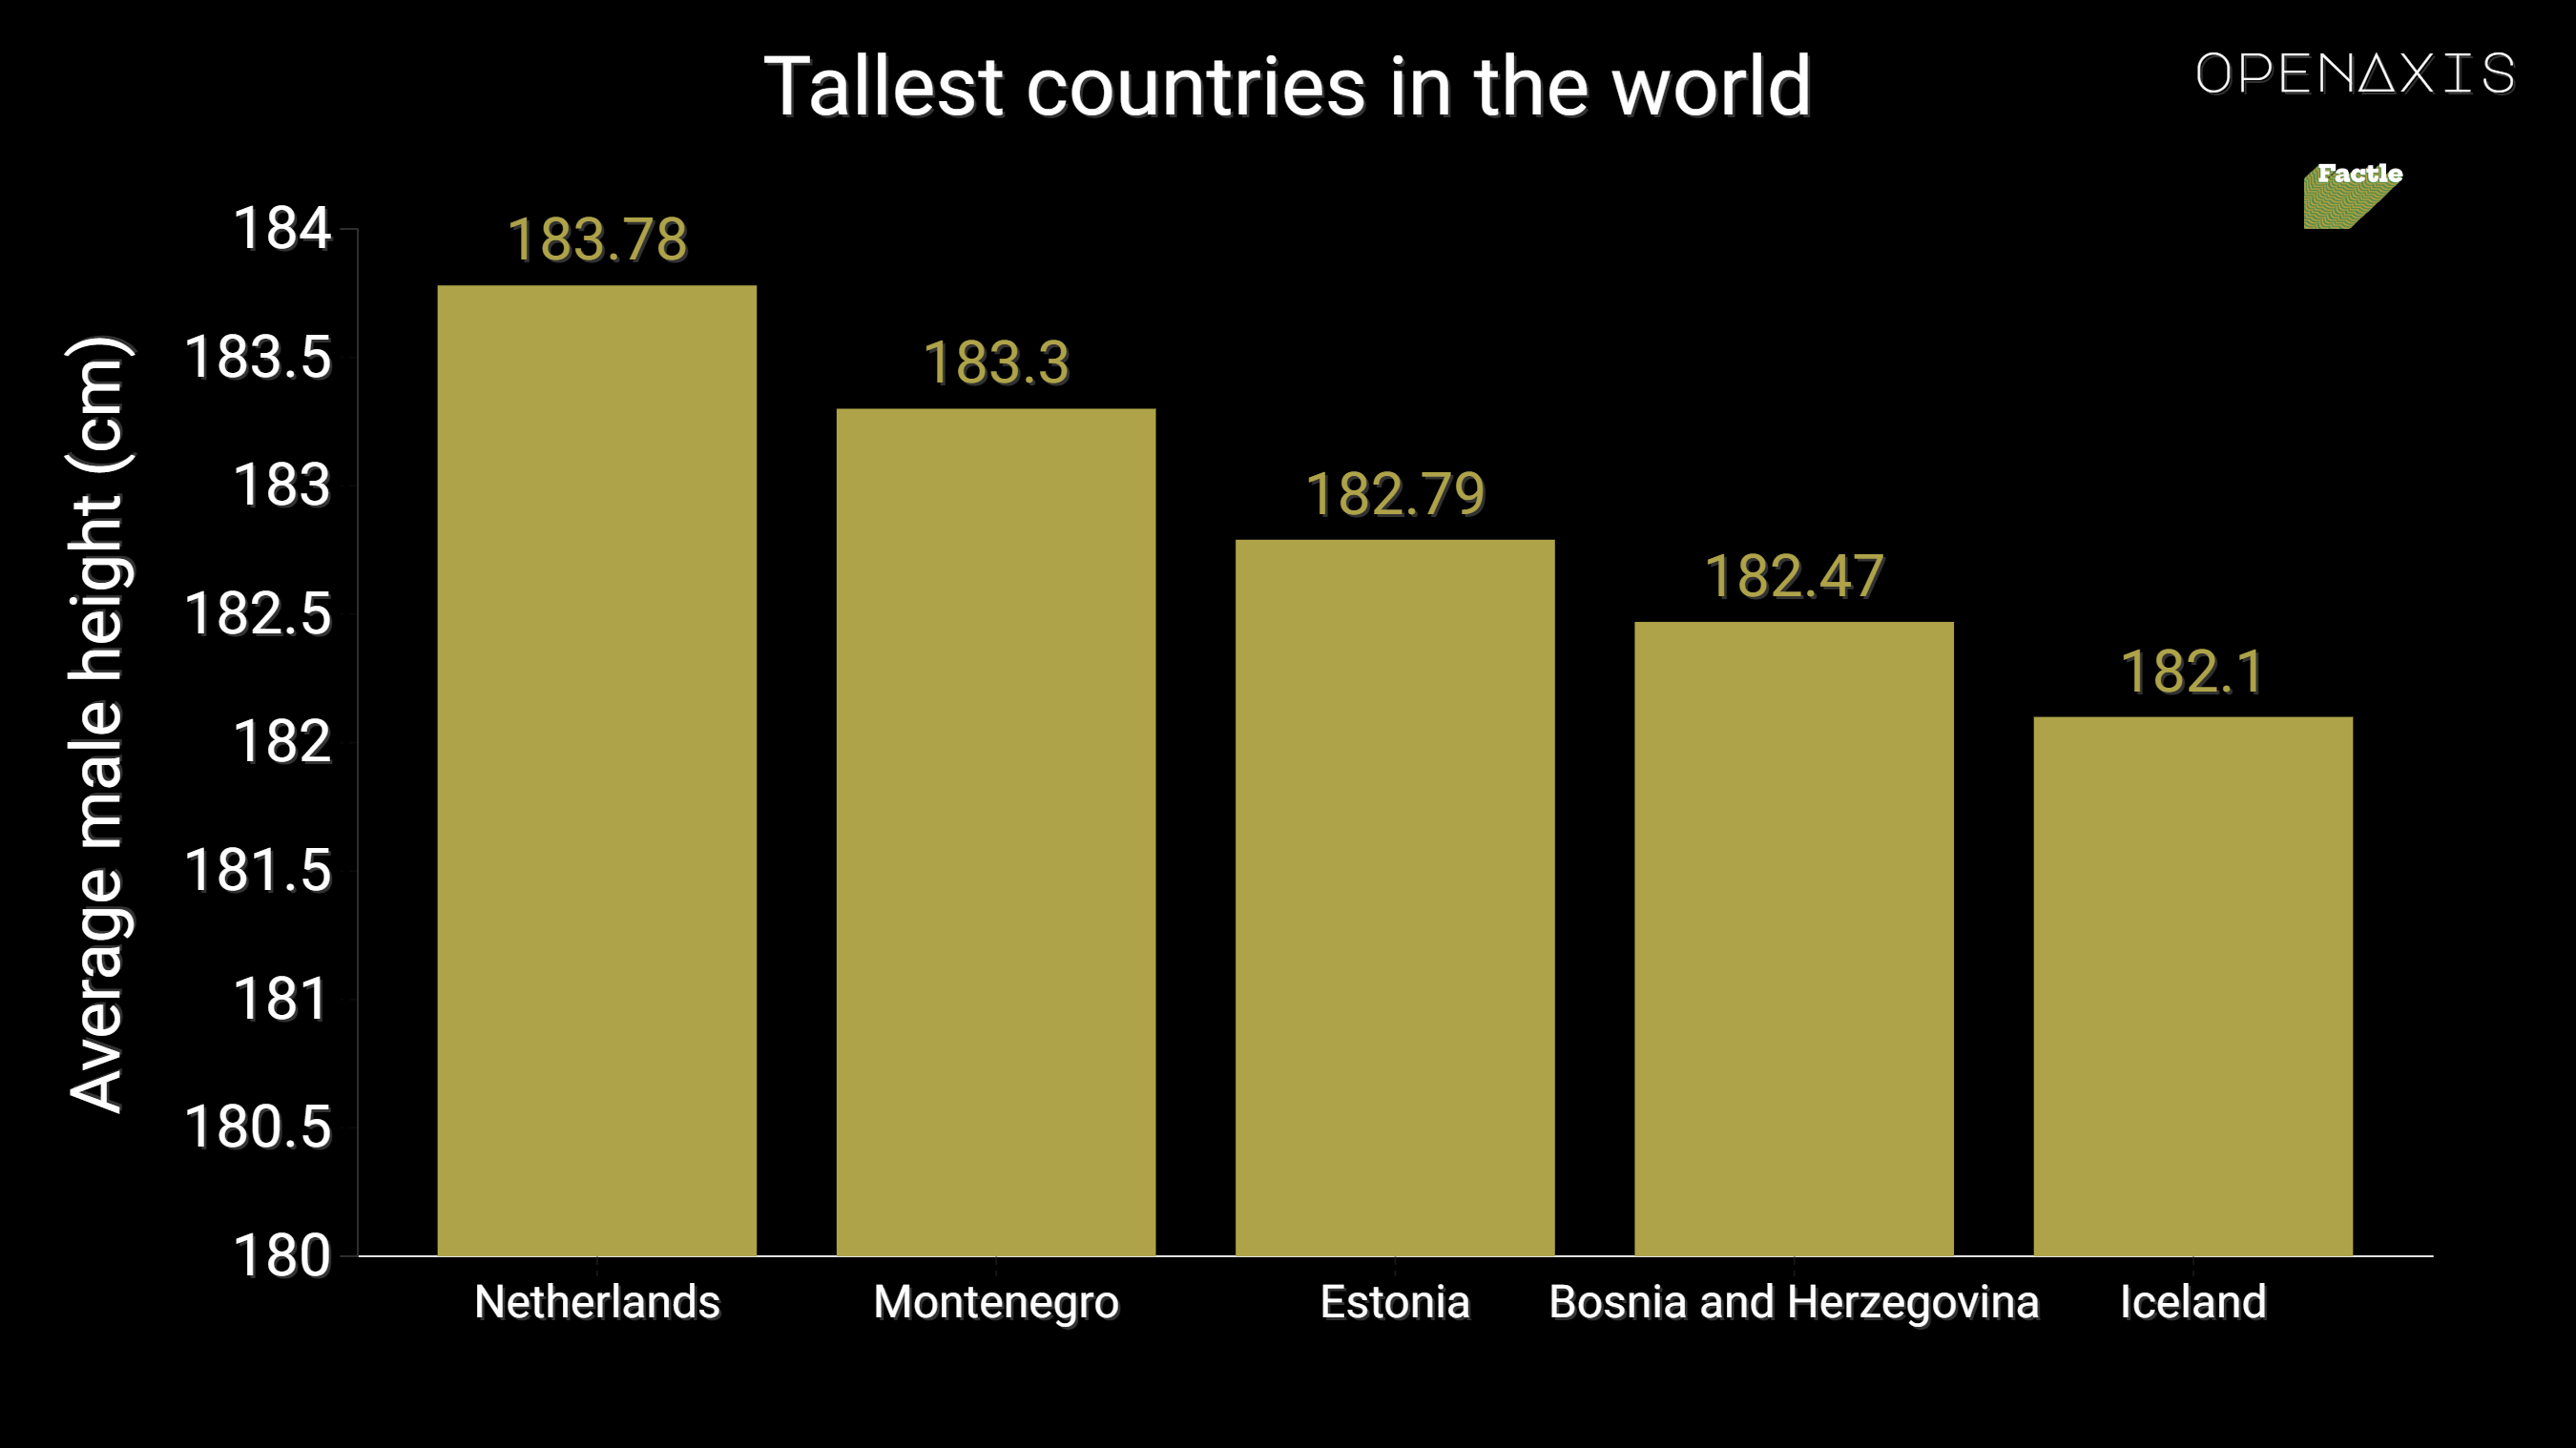 "Tallest countries in the world"